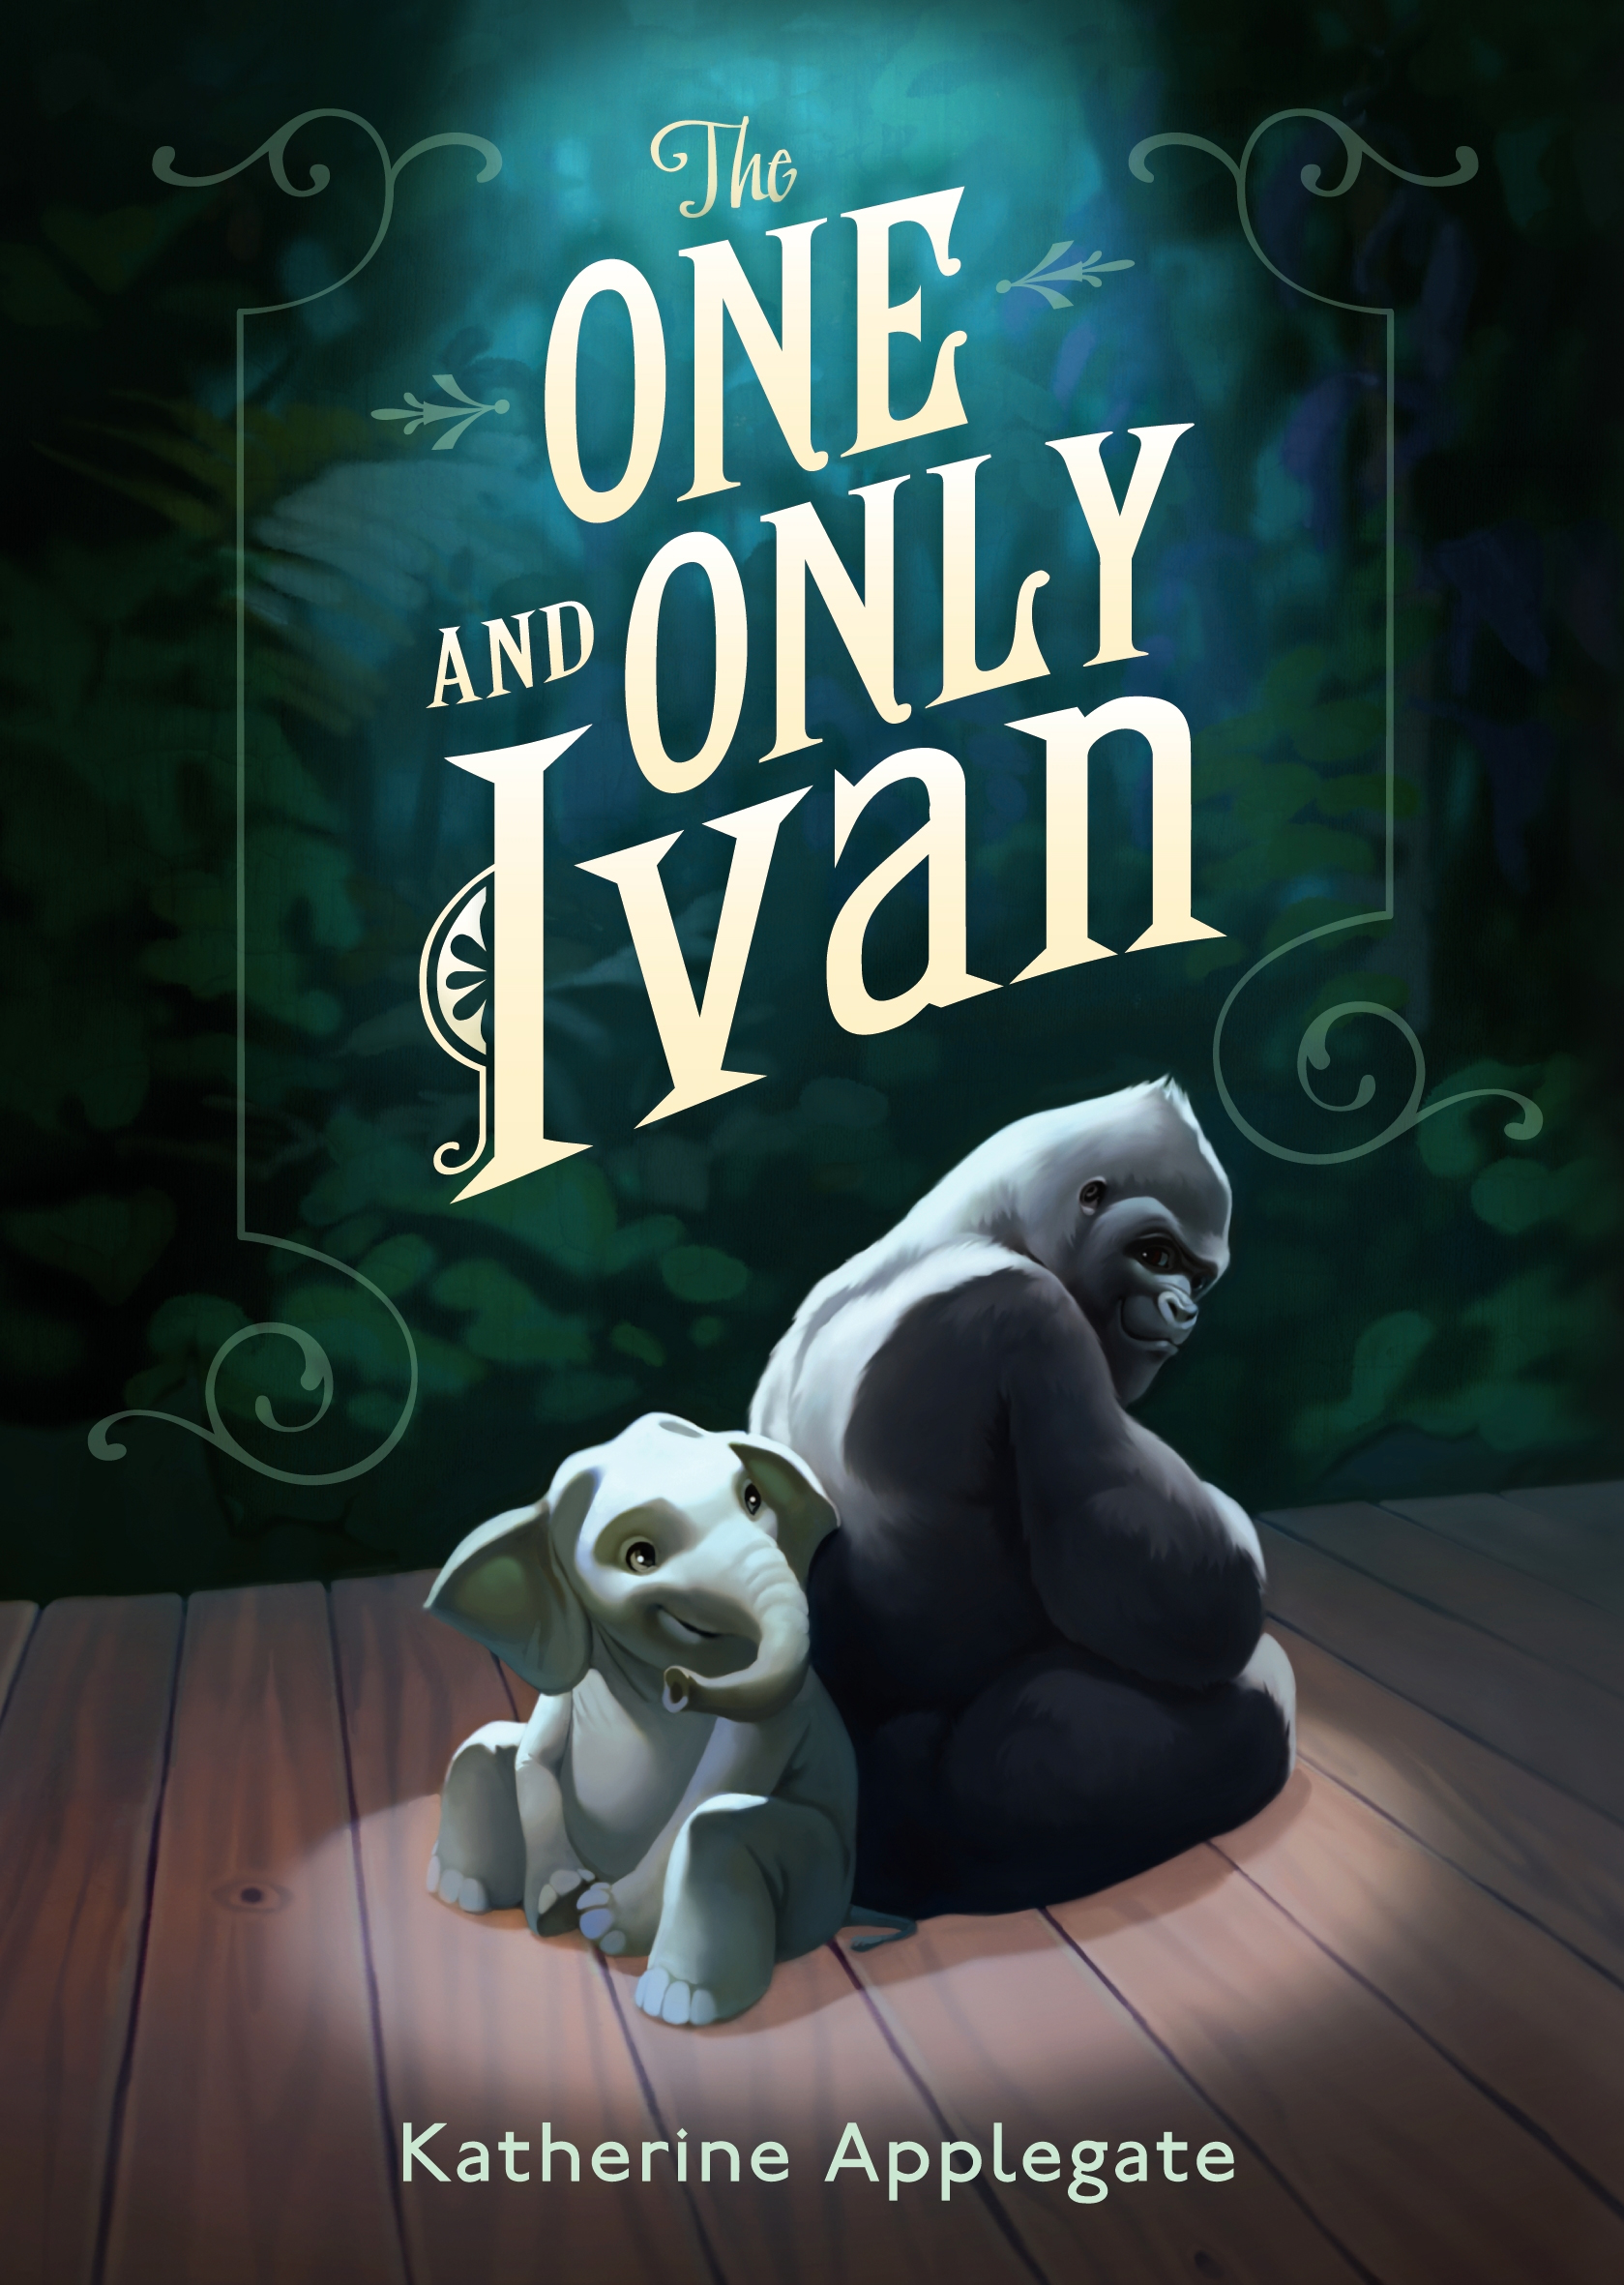 Disney to Acquire Newberry Award Winner THE ONE AND ONLY IVAN — GeekTyrant1679 x 2362